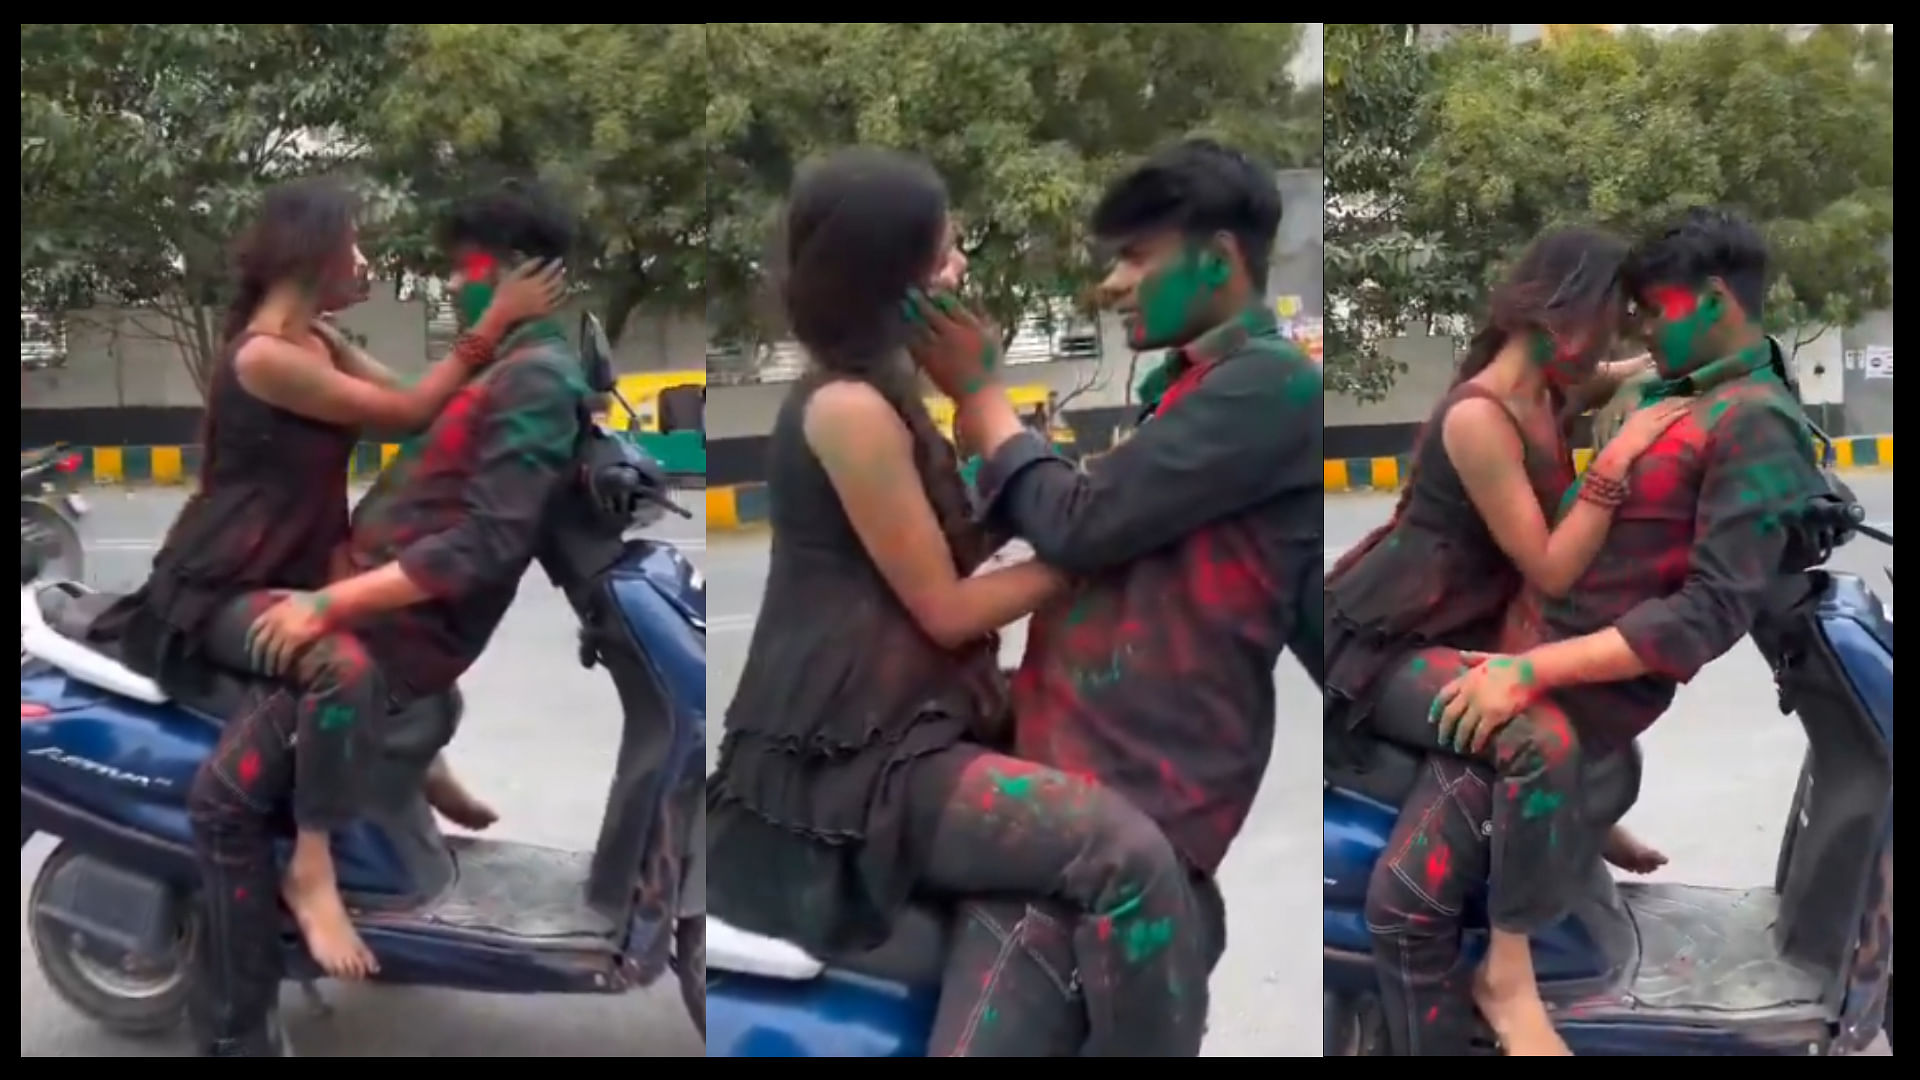 Noida girl seen playing obscene Holi with young man on scooty video viral on social media Case registered